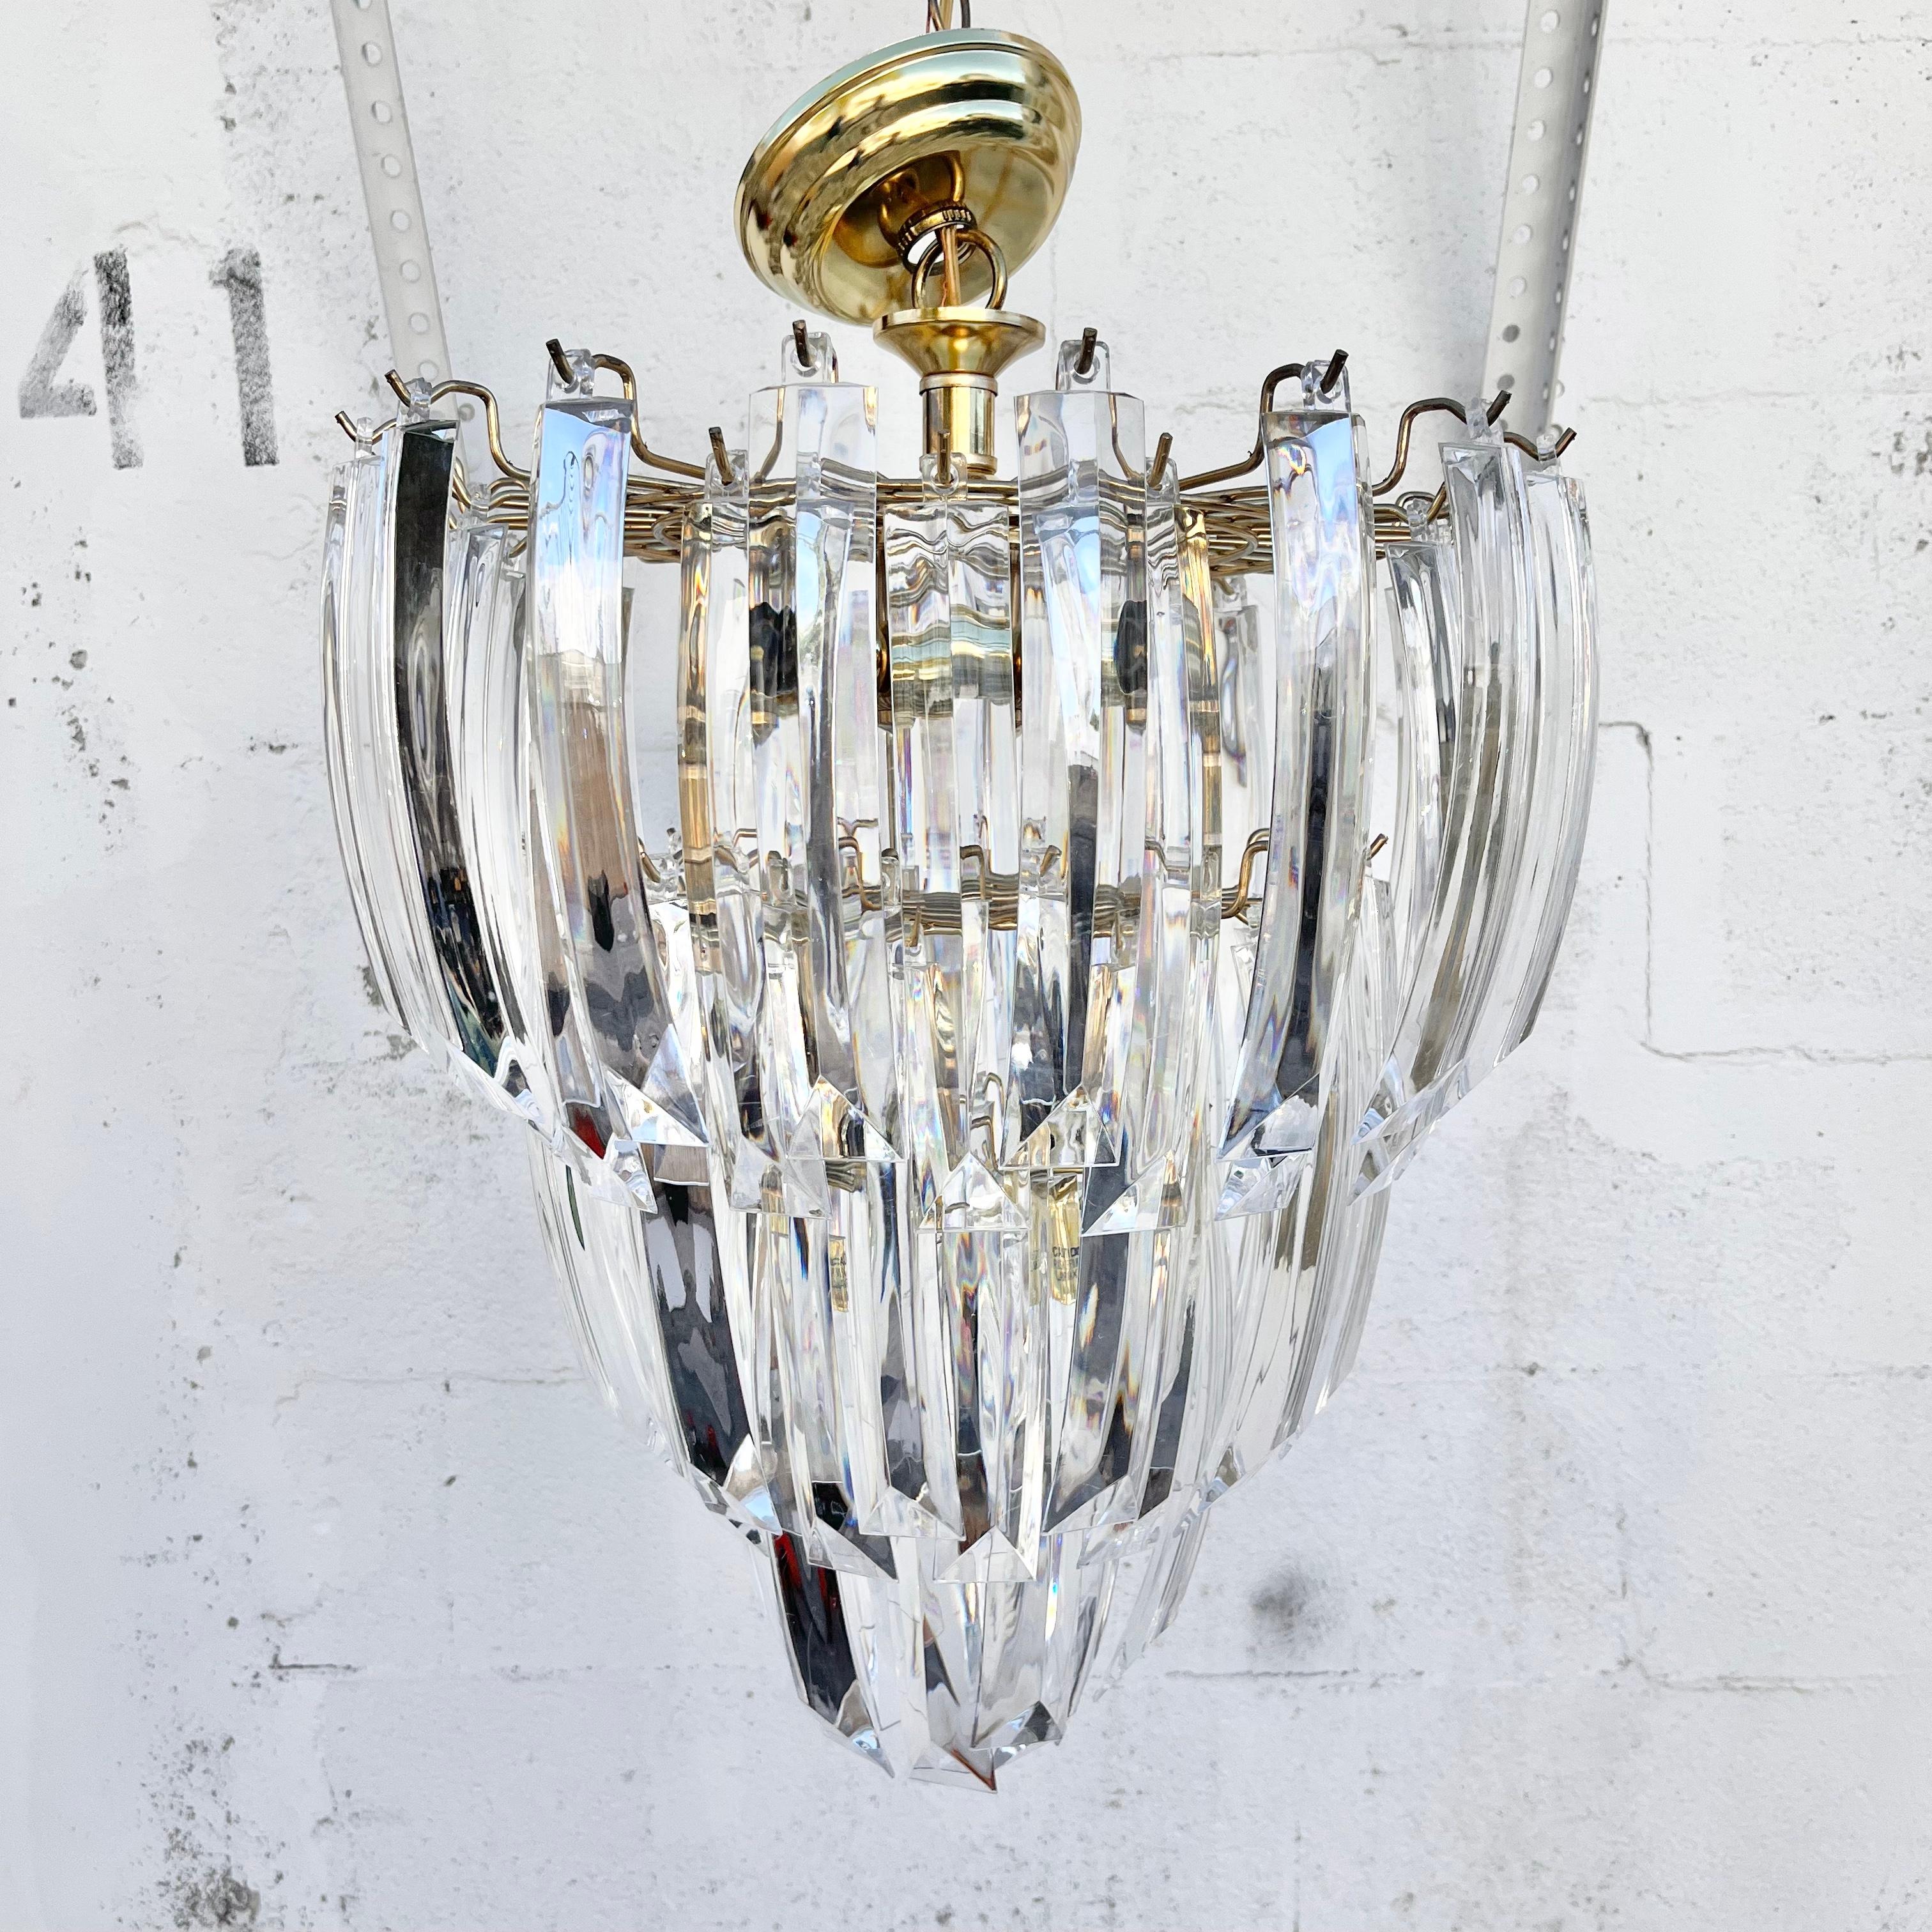 Large Mid-Century Modern three-tier Prism Lucite chandelier. Circa 1970s 
This medium to large scale chandelier features a brass plated metal frame with three tiers of about 8 inches long and slightly arched lucite crystals, with 10 chandelier